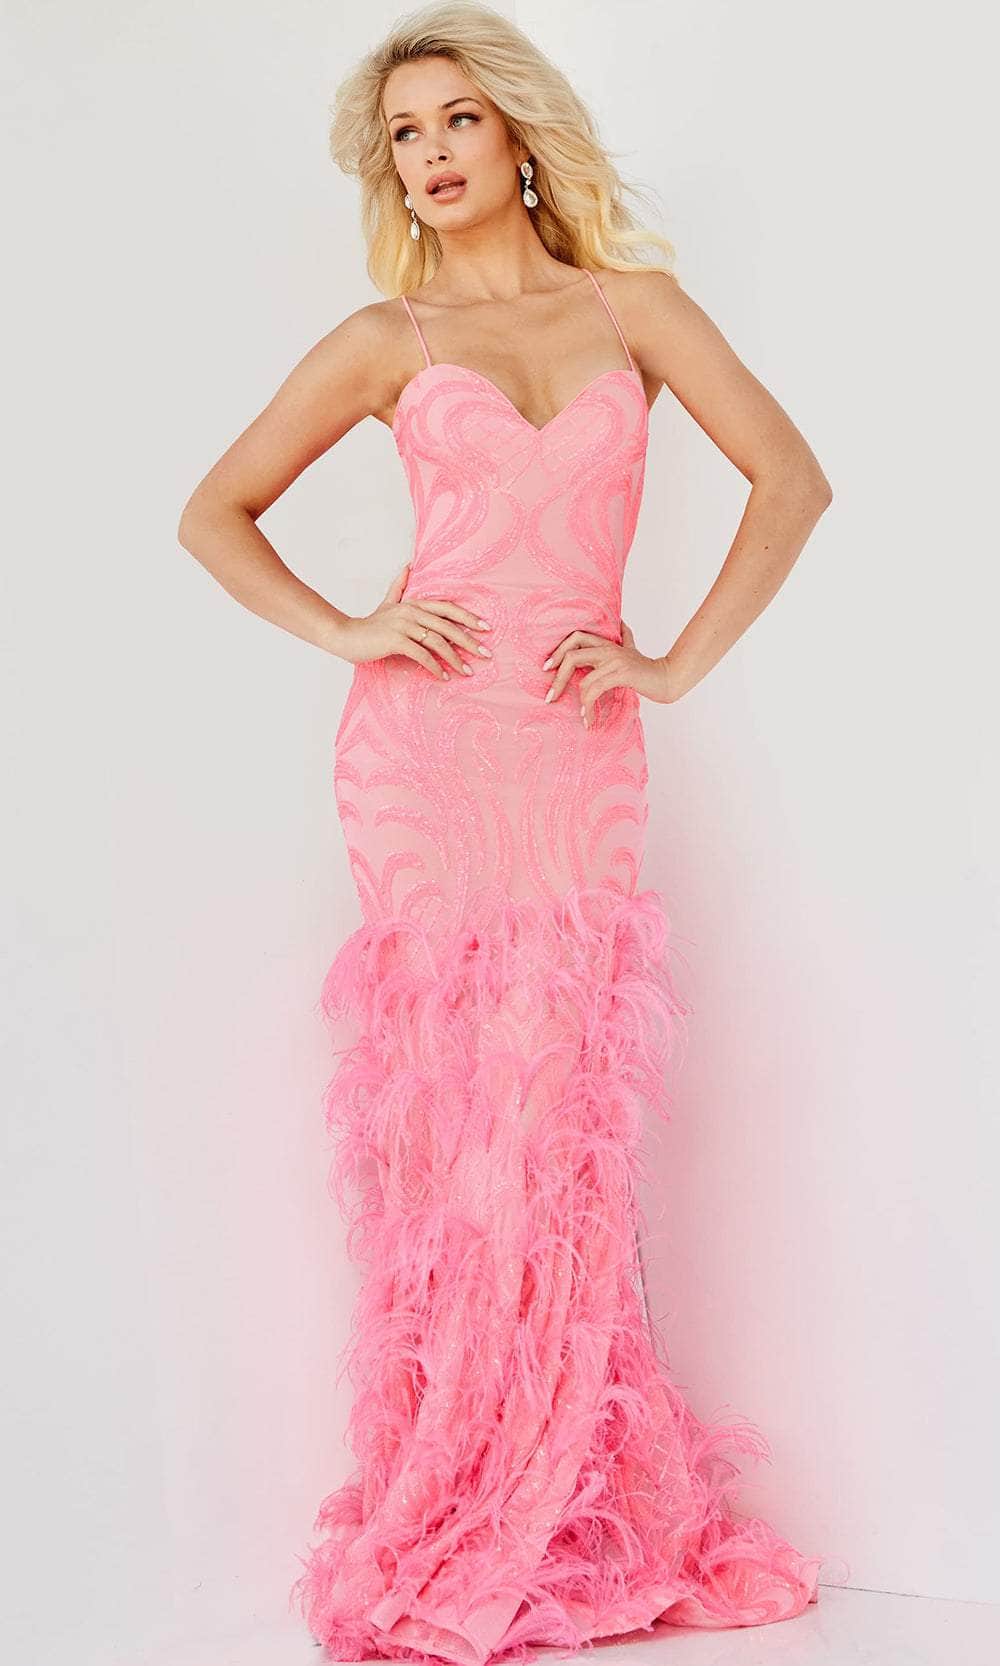 Jovani 07425 - Sweetheart Sequin Feathered Prom Dress
